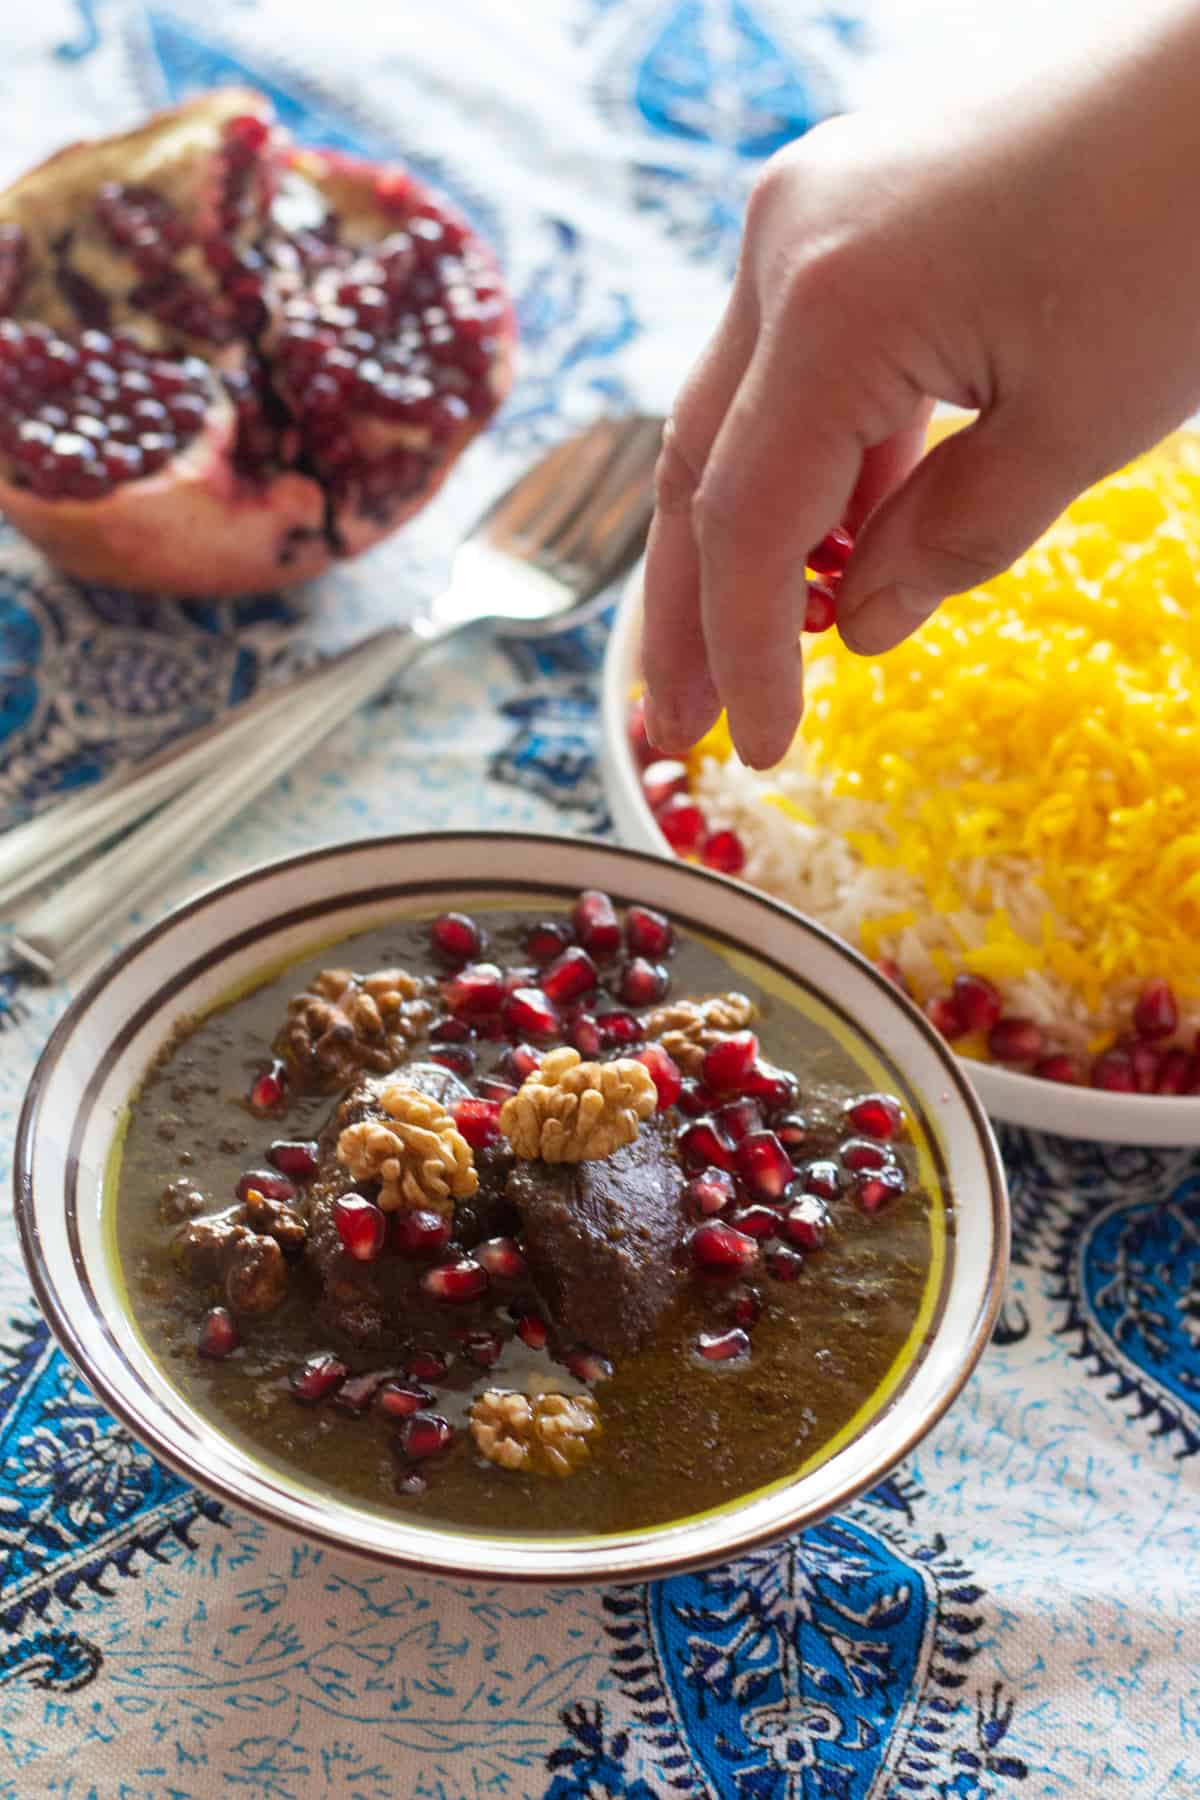 Fesenjan is a traditional Persian pomegranate and walnut chicken stew. It's sweet and sour with a rich nutty flavor and served over rice. The chicken is cooked in a rich walnut and pomegranate sauce until tender, making this a luscious and delicious meal. 